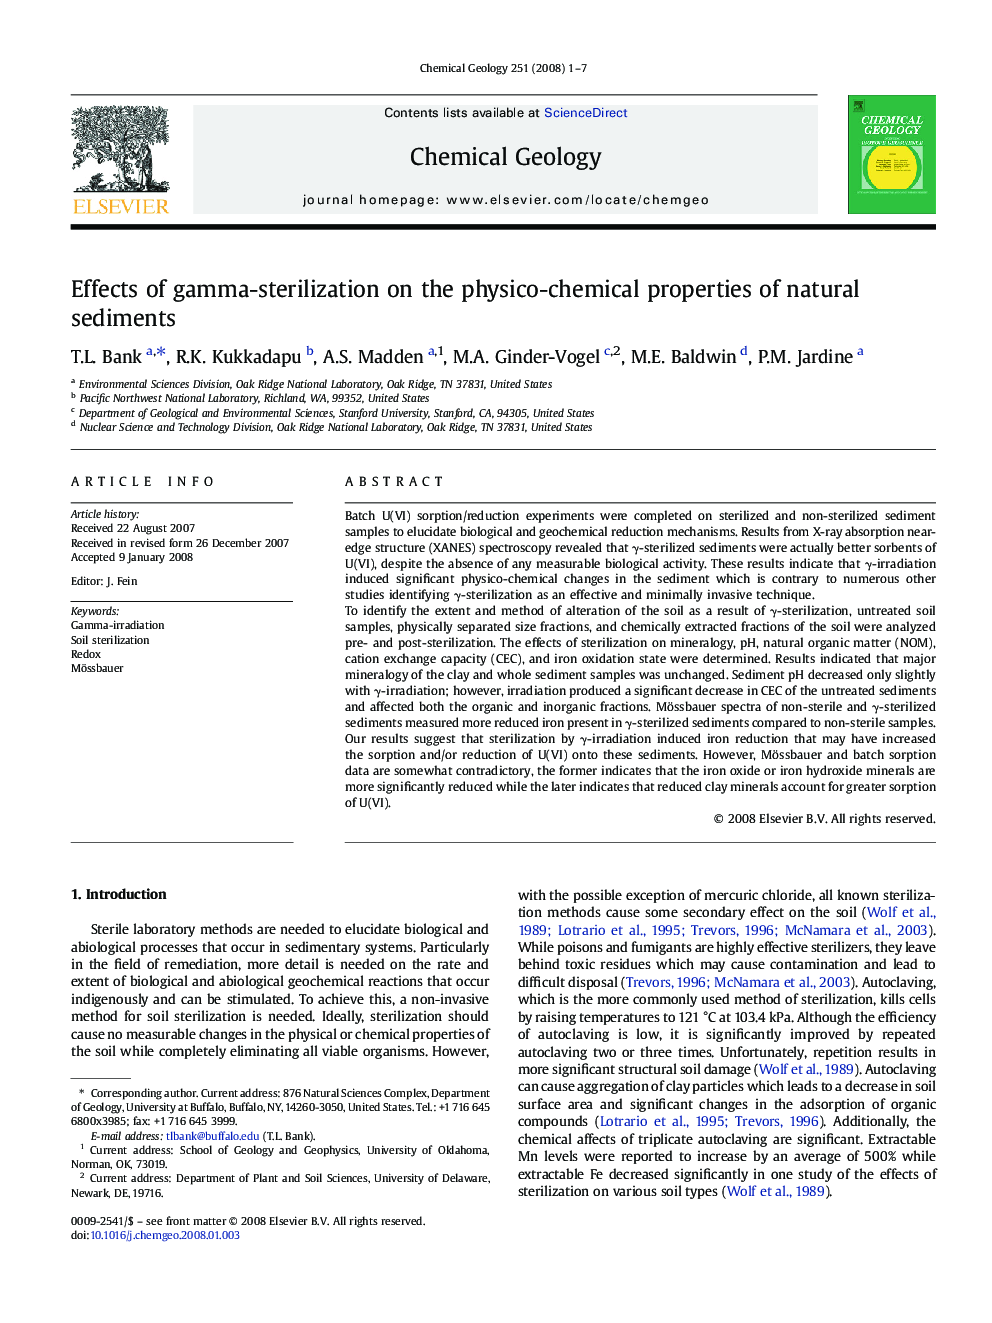 Effects of gamma-sterilization on the physico-chemical properties of natural sediments